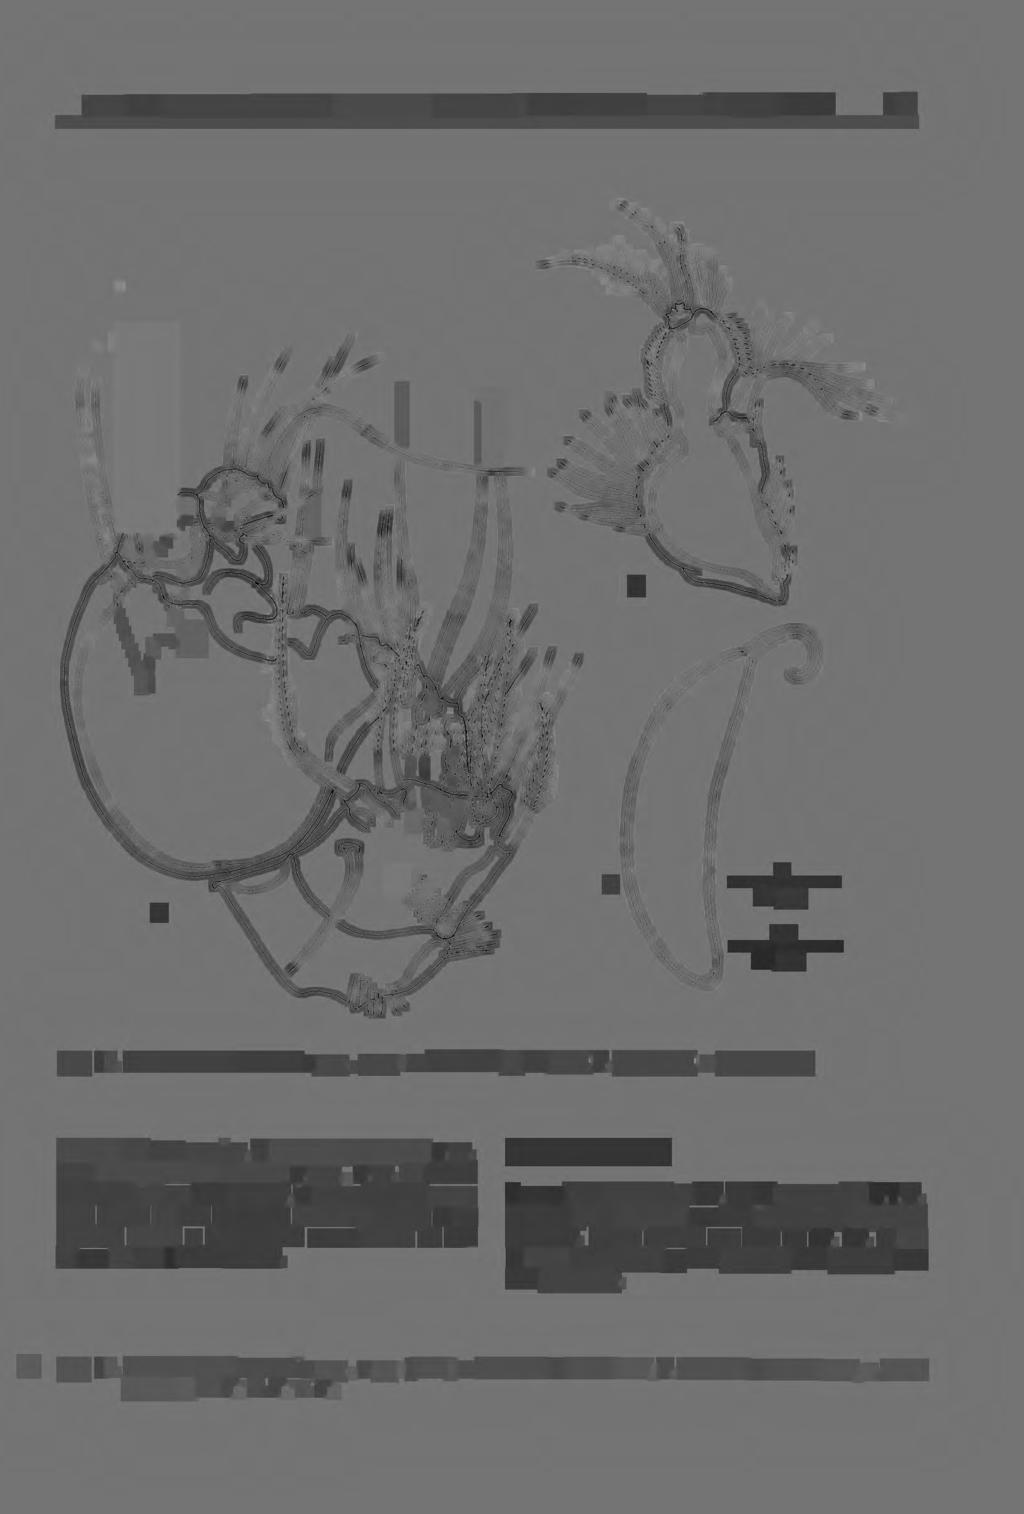 New and interesting copepods (Crustacea, Copepoda) from brackish waters of Laing Island 119 I '. -- ' \ / -... ~~... \ I I I 11 a c c 50JJm ab 25 JJm Fig. 13. Actinocletodes woute rsi n. gen., n.sp.